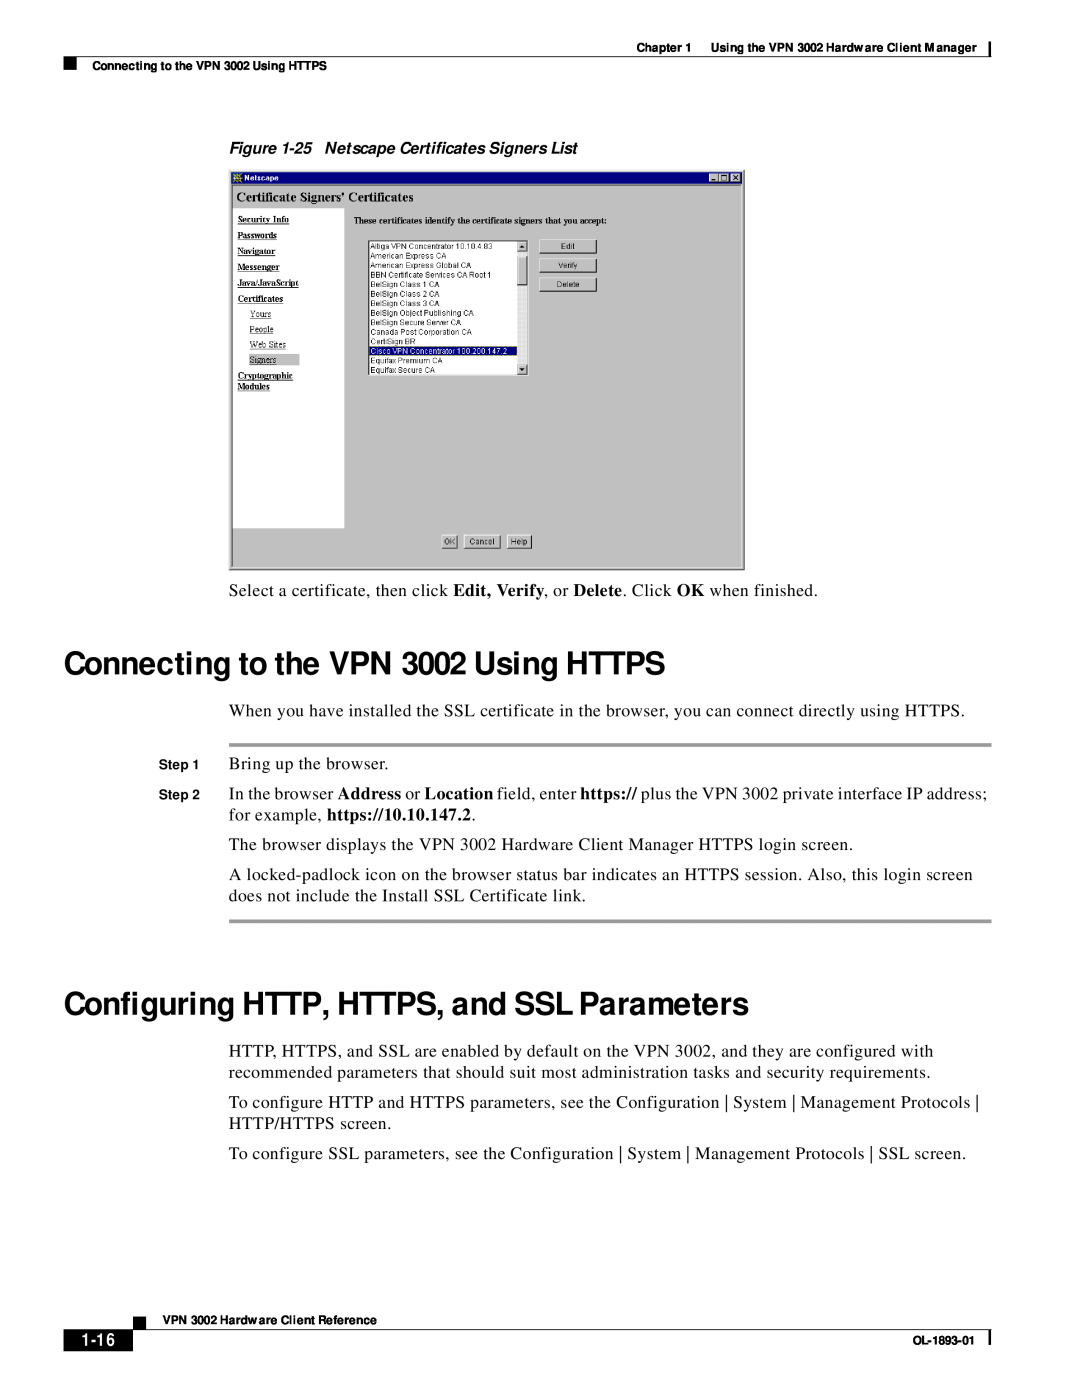 Cisco Systems manual Connecting to the VPN 3002 Using HTTPS, Configuring HTTP, HTTPS, and SSL Parameters, 1-16 